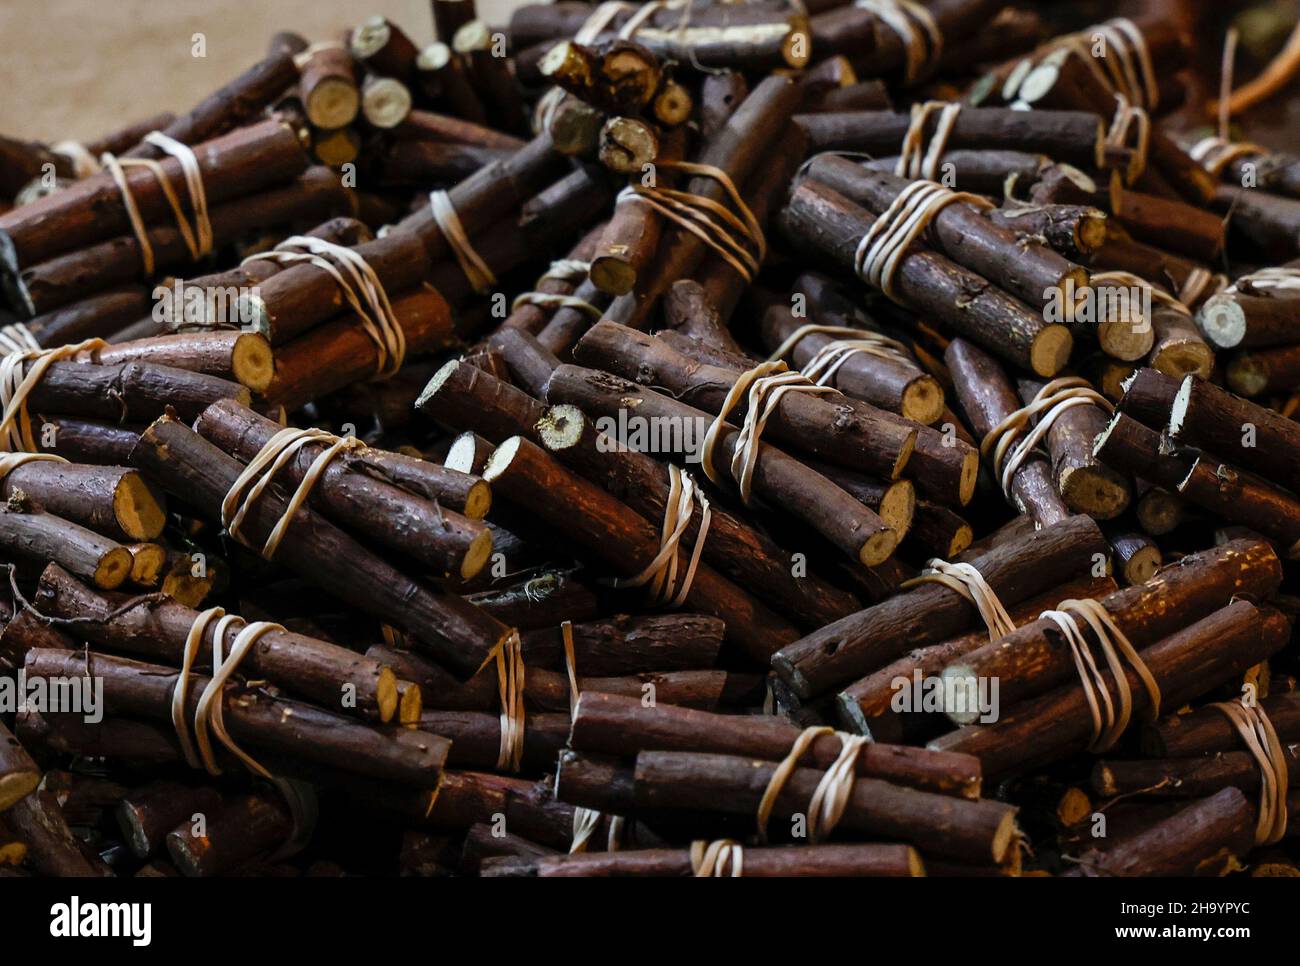 Licorice roots for sale on a market stall in Vic, Catalonia, Spain Stock Photo